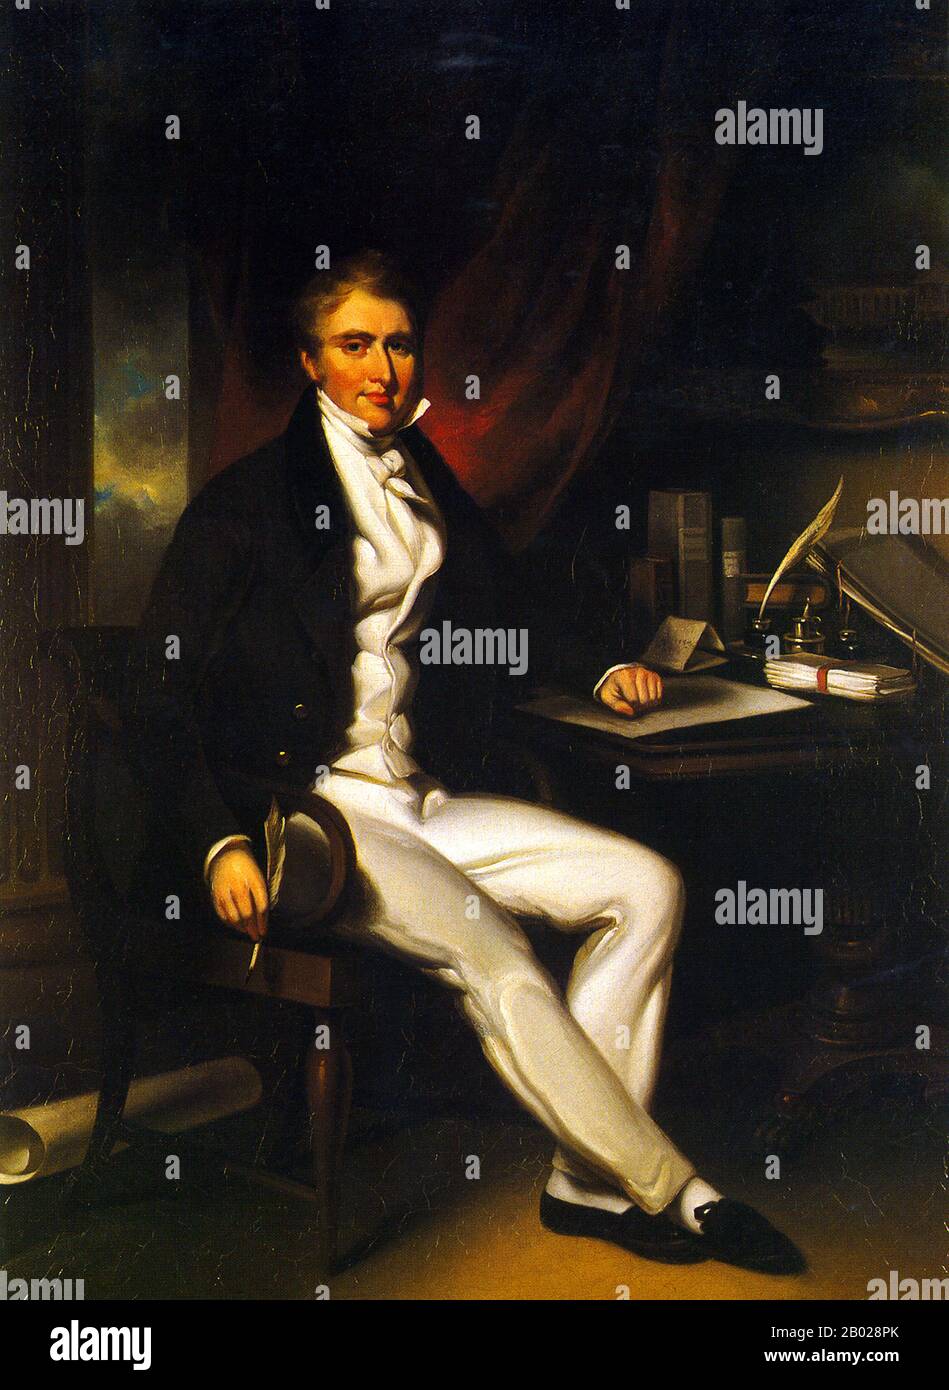 William Jardine (24 February 1784 – 27 February 1843) was a Scottish physician and merchant. He co-founded the Hong Kong conglomerate Jardine, Matheson and Company in 1832.  Jardine, one of five children, was born in 1784 on a small farm near Lochmaben, Dumfriesshire, Scotland. His father, Andrew Jardine, died when he was nine, leading the family in some economic difficulty. Though struggling to make ends meet, Jardine's older brother David provided him with money to attend school. Jardine began to acquire credentials at the age of sixteen. In 1800 when he entered the University of Edinburgh M Stock Photo